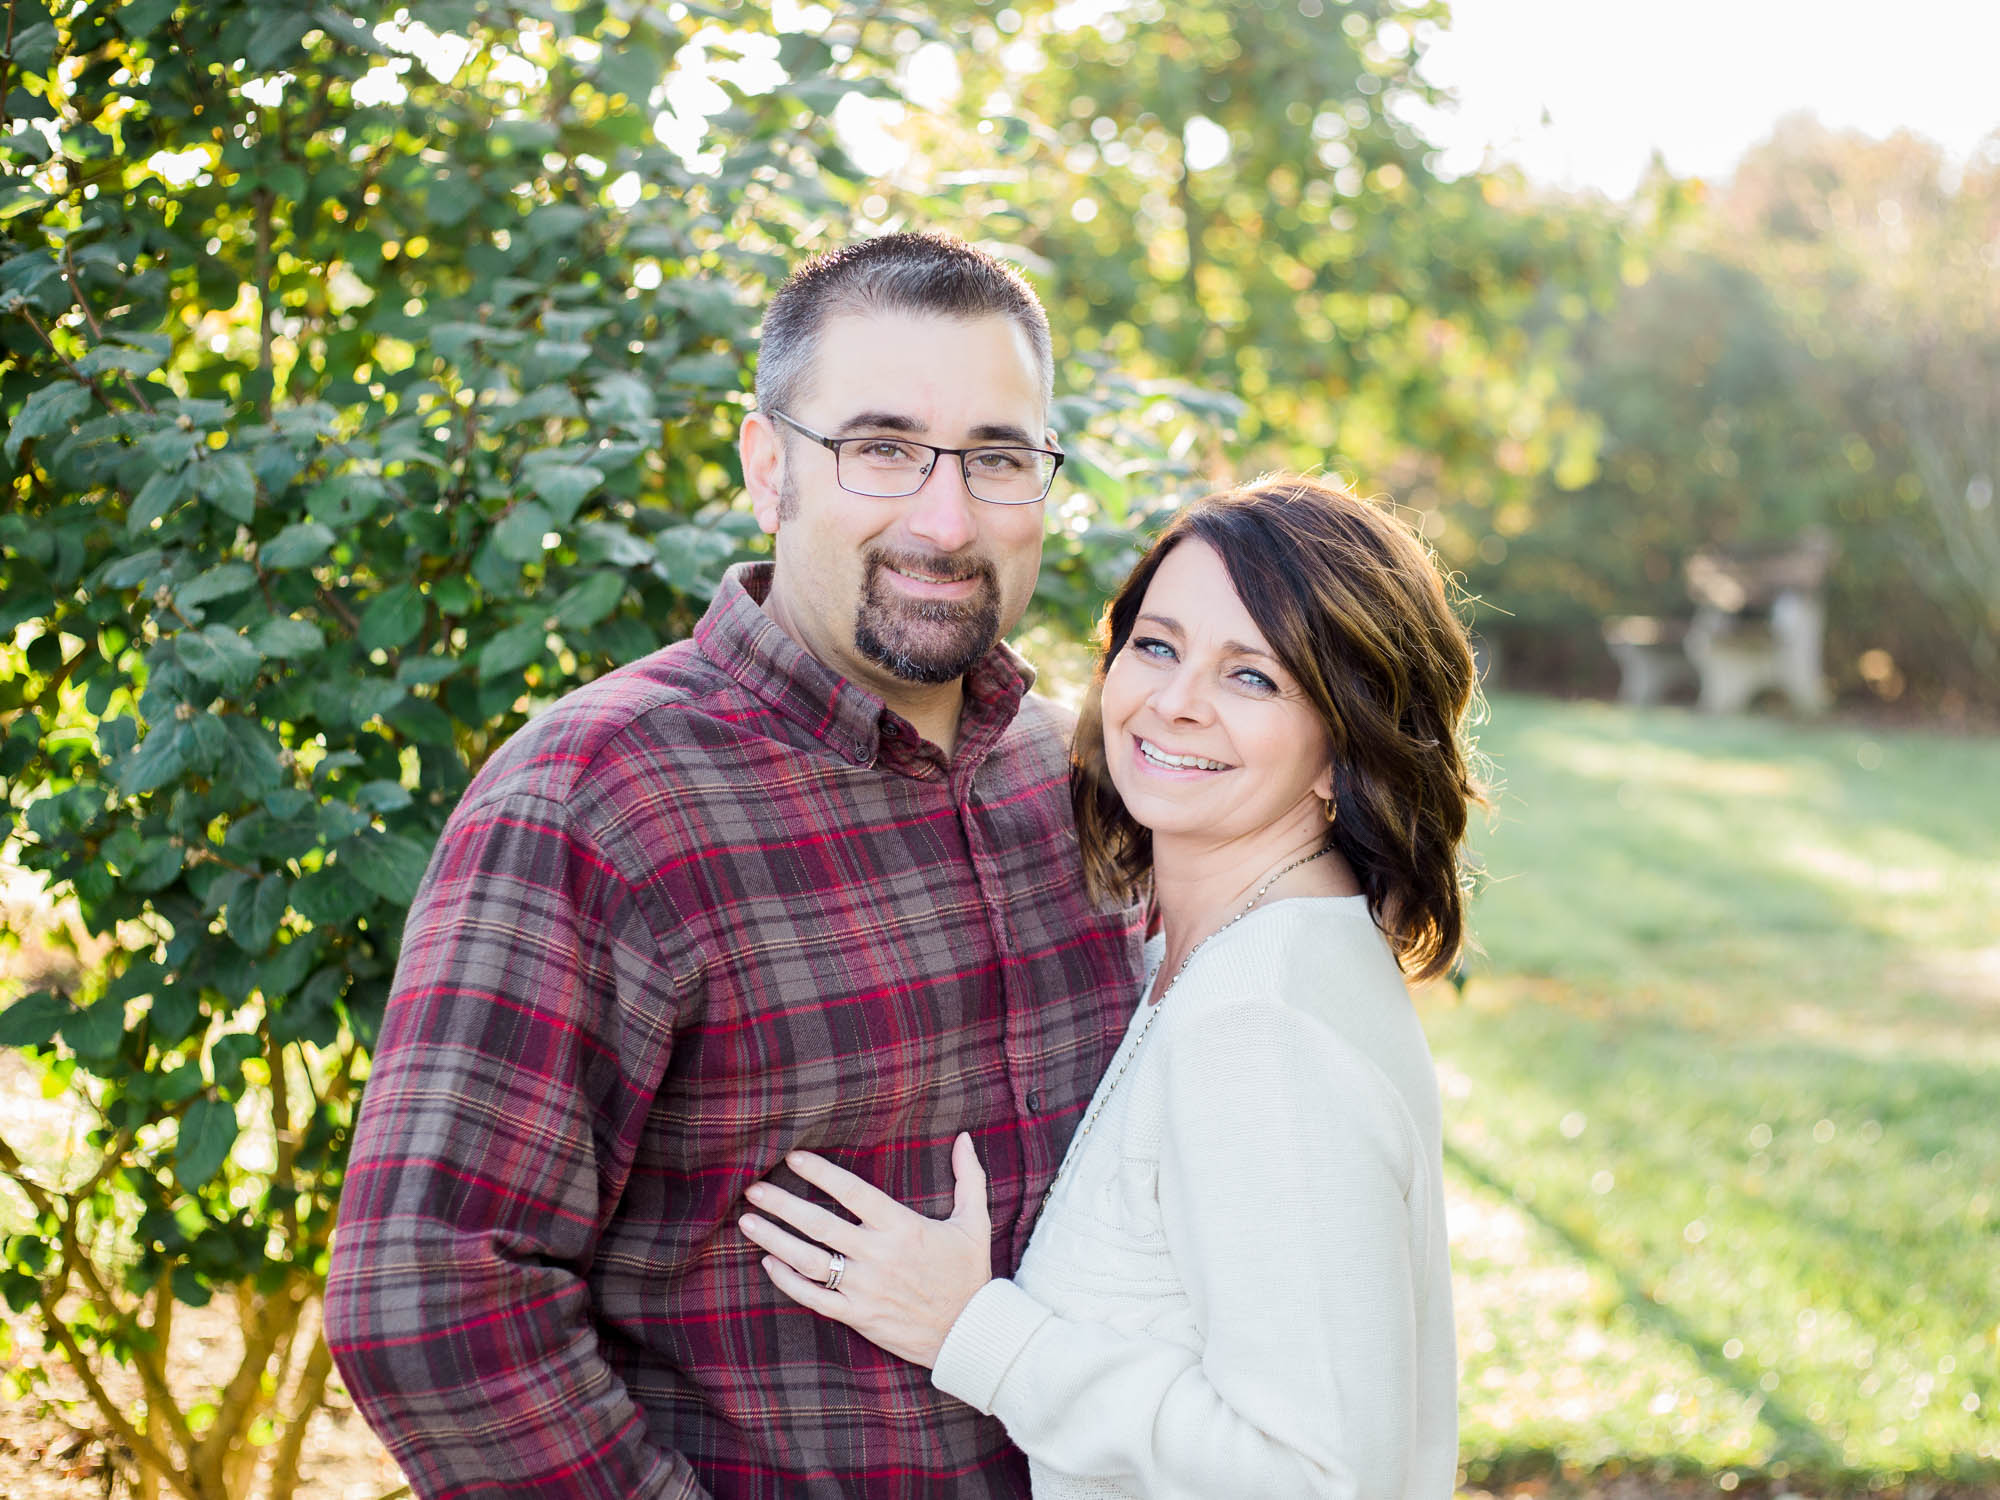 Fall Family Photos in Wooster Ohio by Cleveland Wedding Photographer Matt Erickson Photography